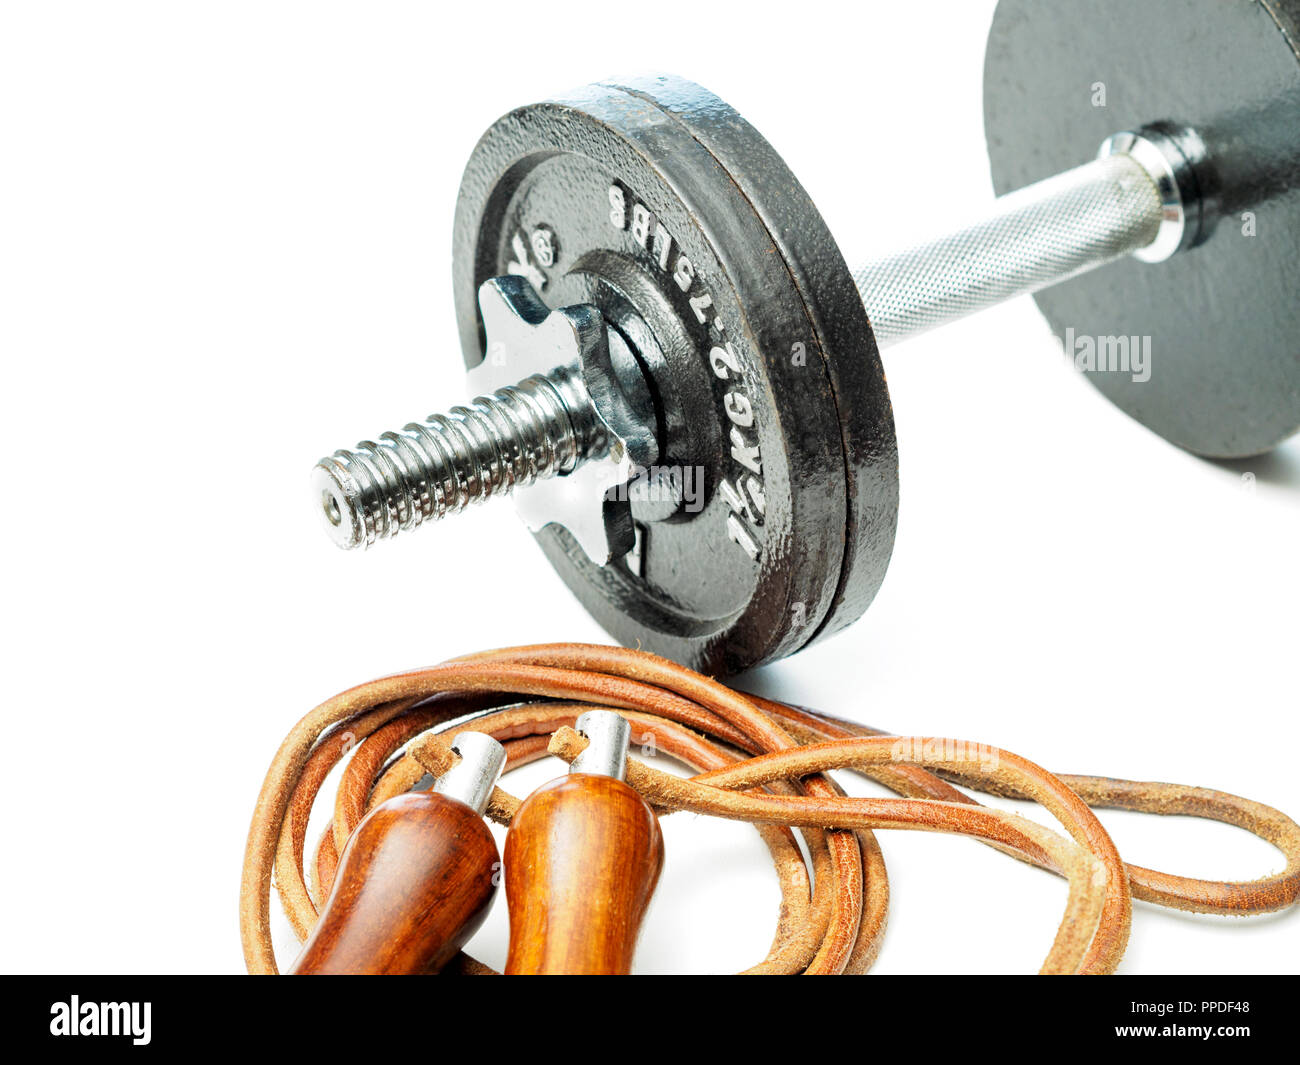 A single steel dumbbell and a leather skipping rope with wooden handles placed on a plain white background with no people Stock Photo